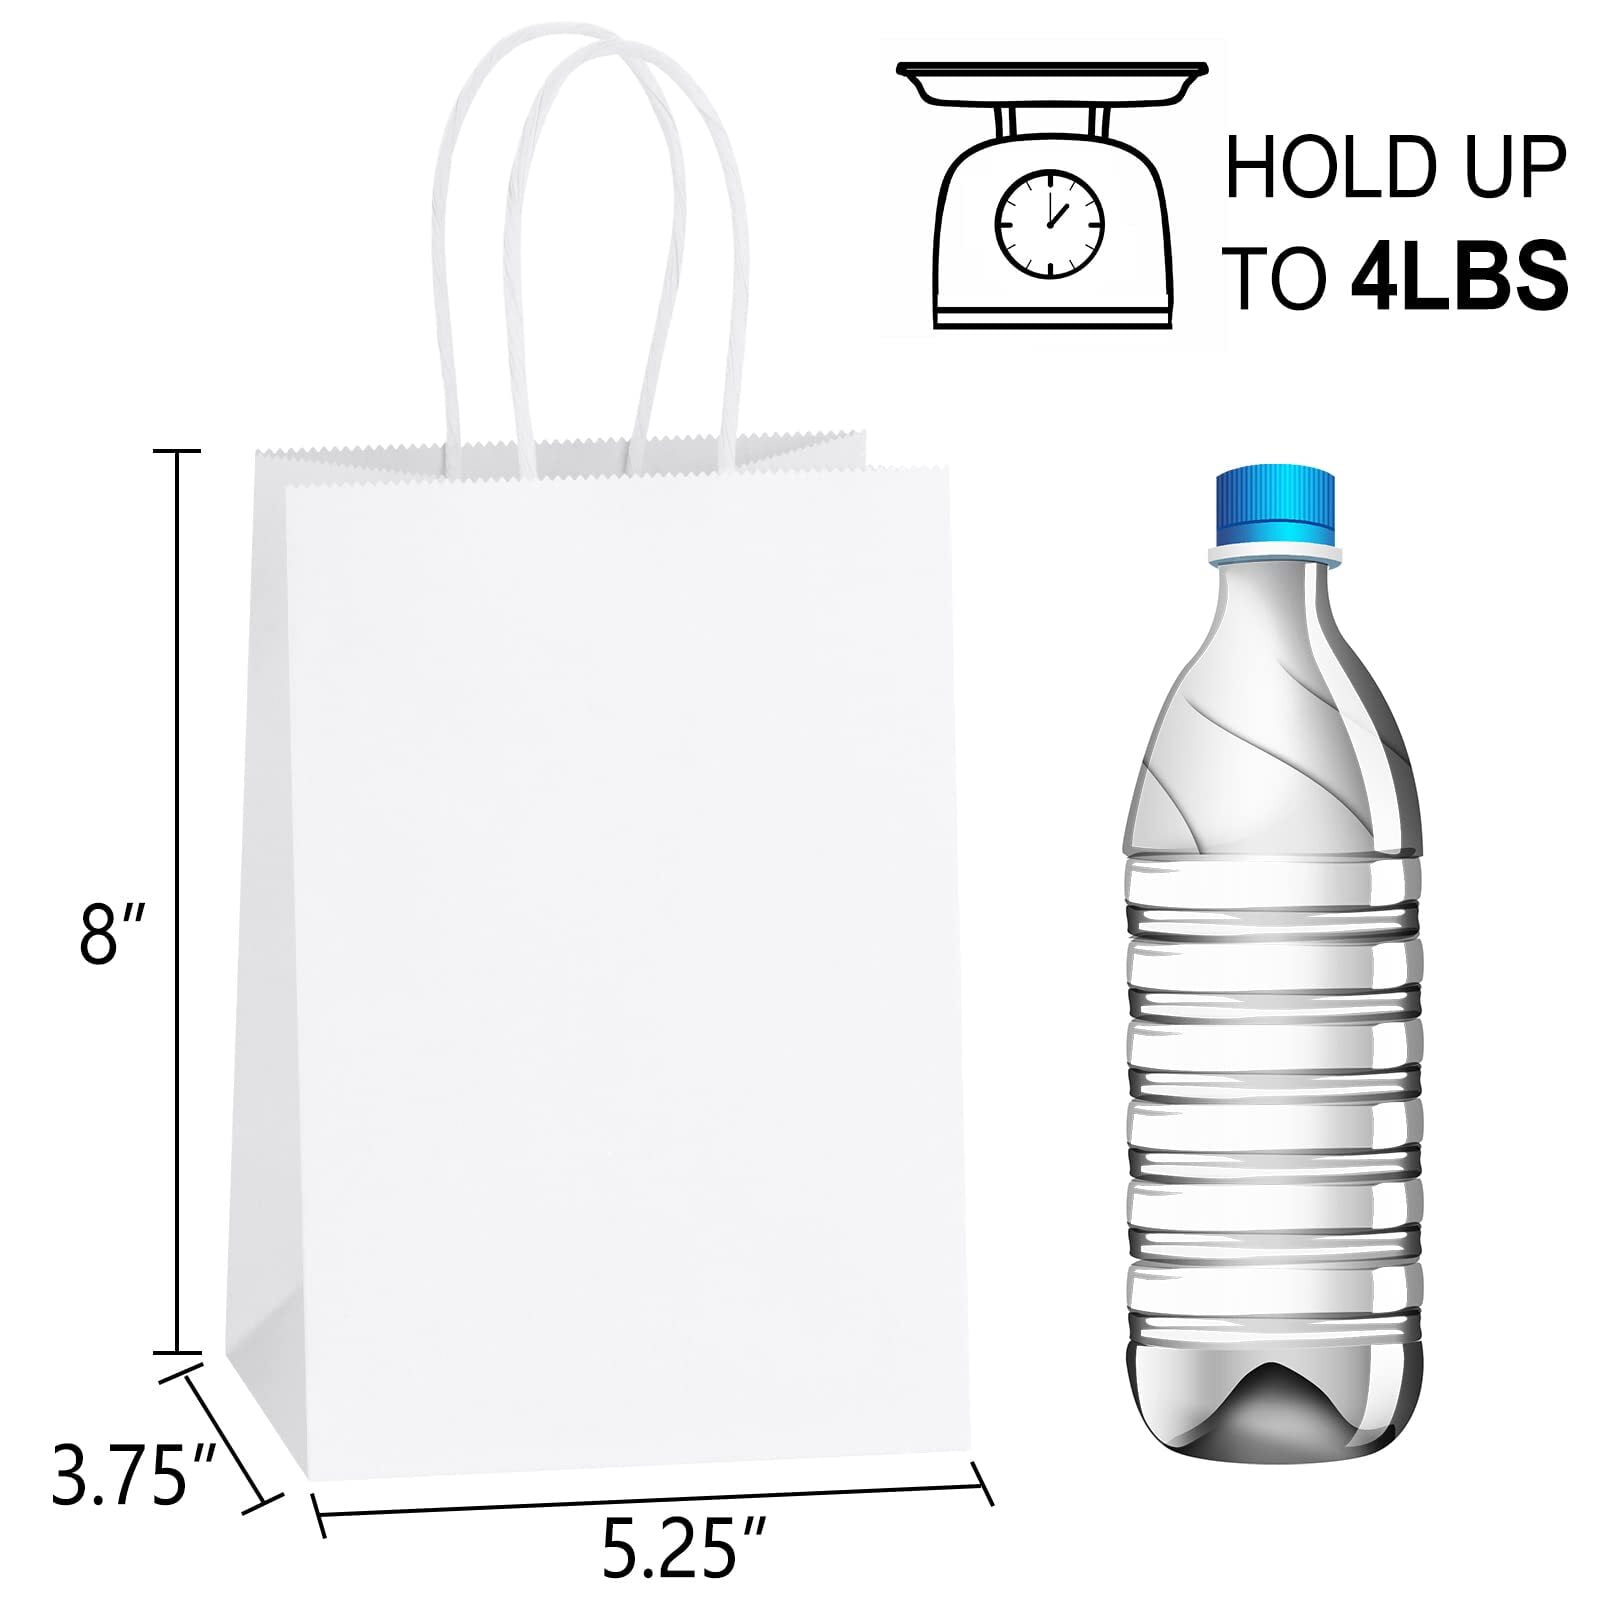 Handled White BB-1001 Cotton Fabric Printed Shopping Bag, 2.3 Kg,  Size/Dimension: 16x14.5 Inch